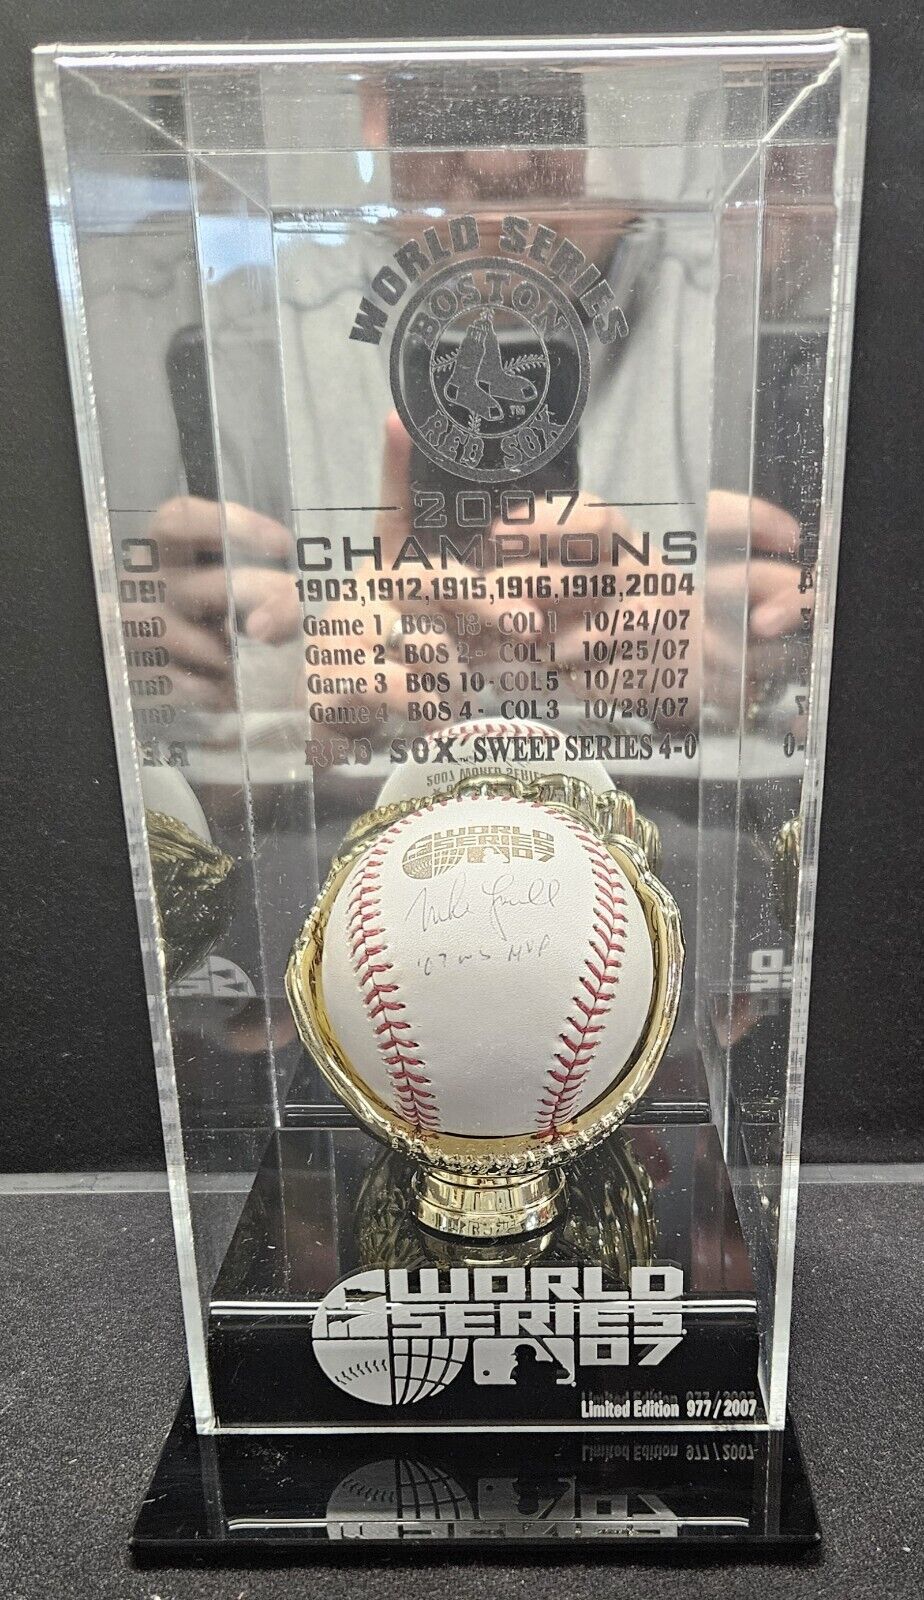 Mike Lowell Signed 2007 World Series Baseball With Shadowbox Display LE 977/2007